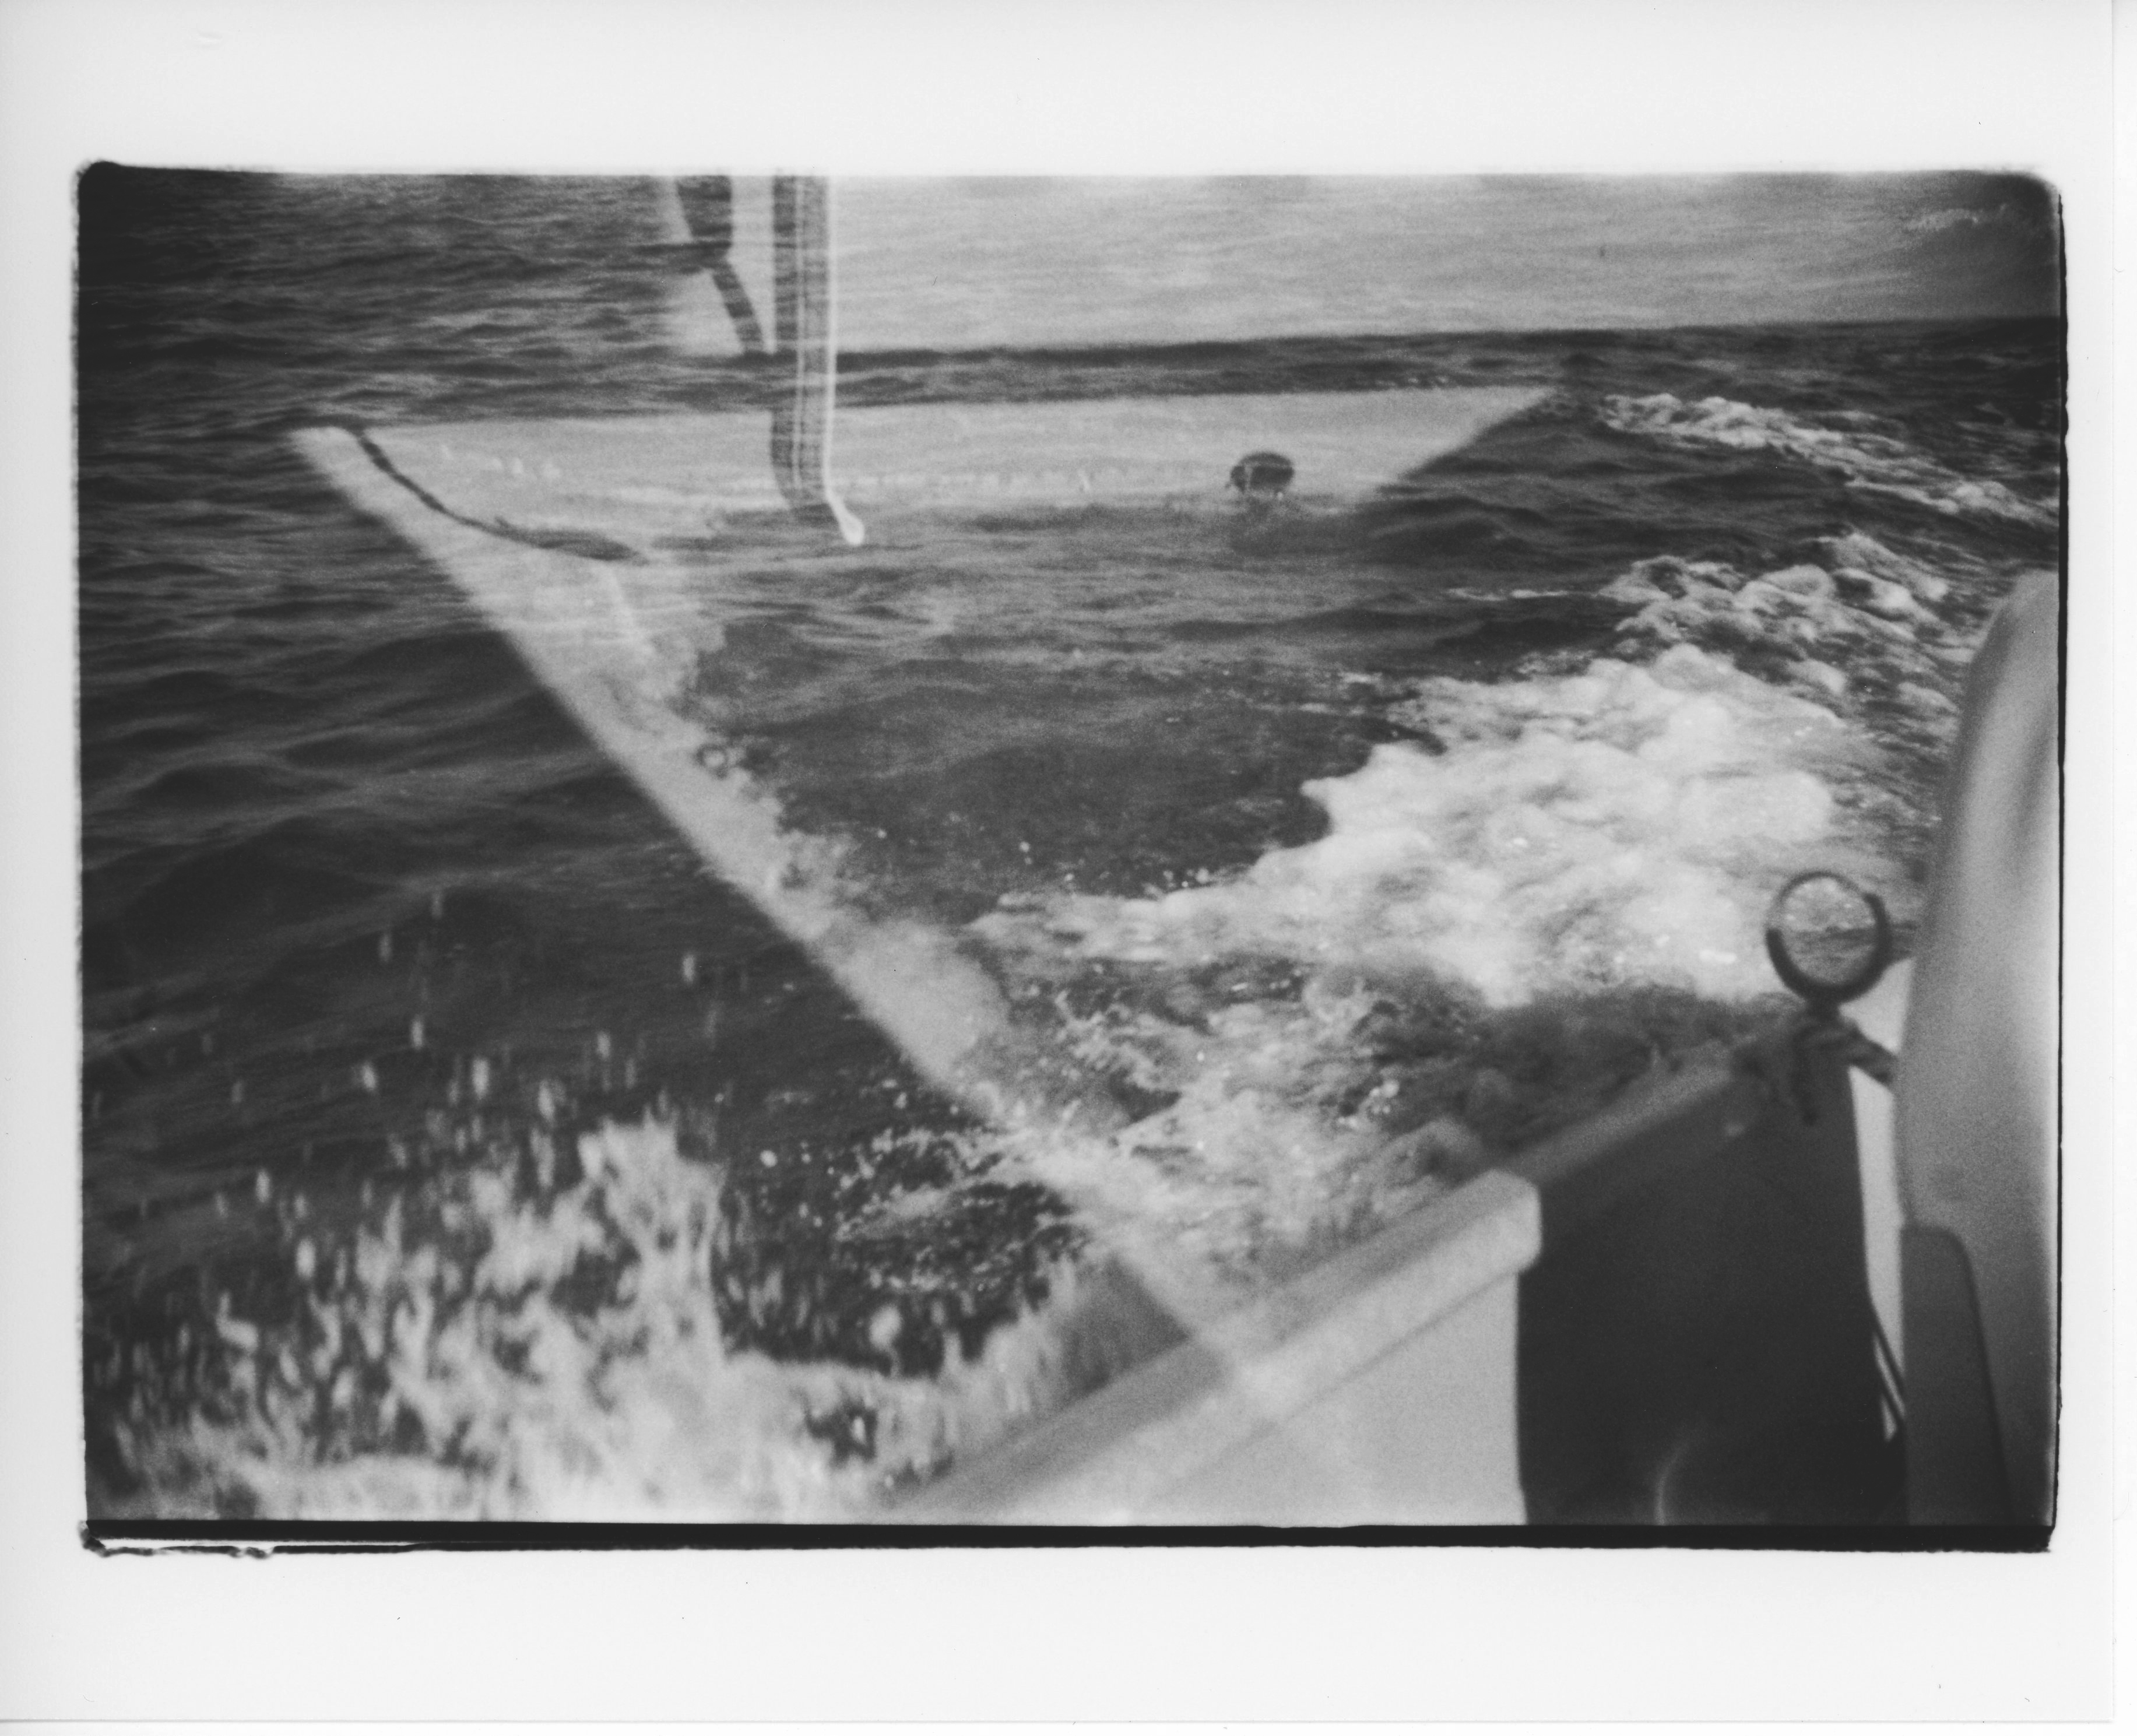 a black and white, 35mm print with messy edges; the image is a double exposure shot from inside a small aluminum outboard motor boat; one image shows the oar rest and the side of the boat in the bottom right corner and the rest of the frame is foam and water next to the boat; the other image shows the sump and the light and shadows in the bottom of the boat